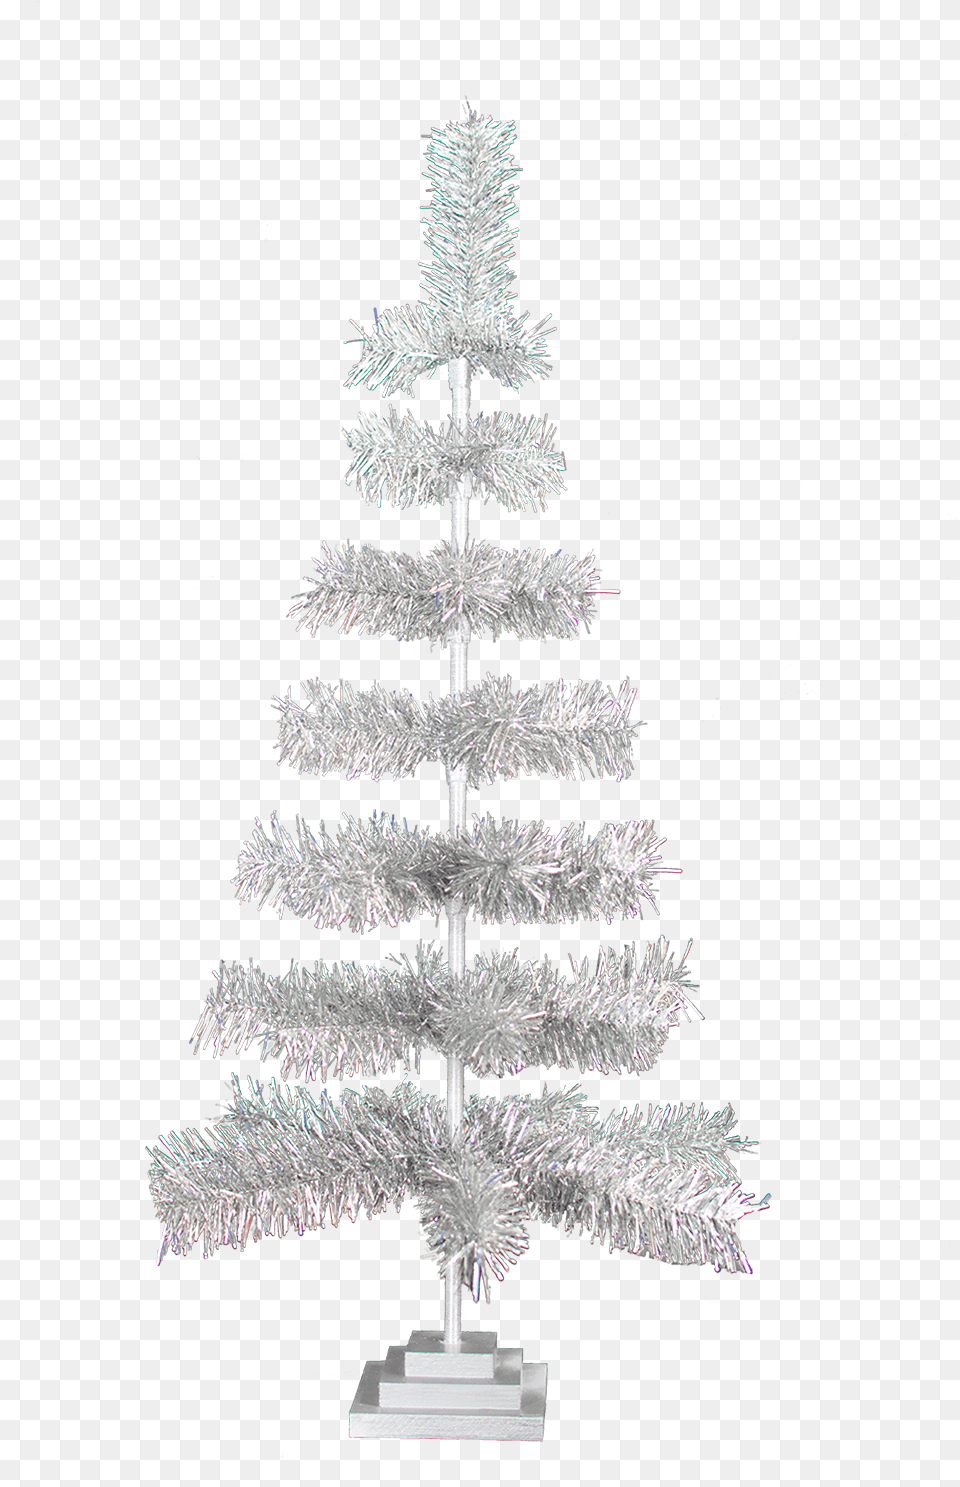 Norton Secured Tinsel Christmas Tree Tabletop Christmas Tree Tinsel, Plant, Christmas Decorations, Festival, Christmas Tree Png Image